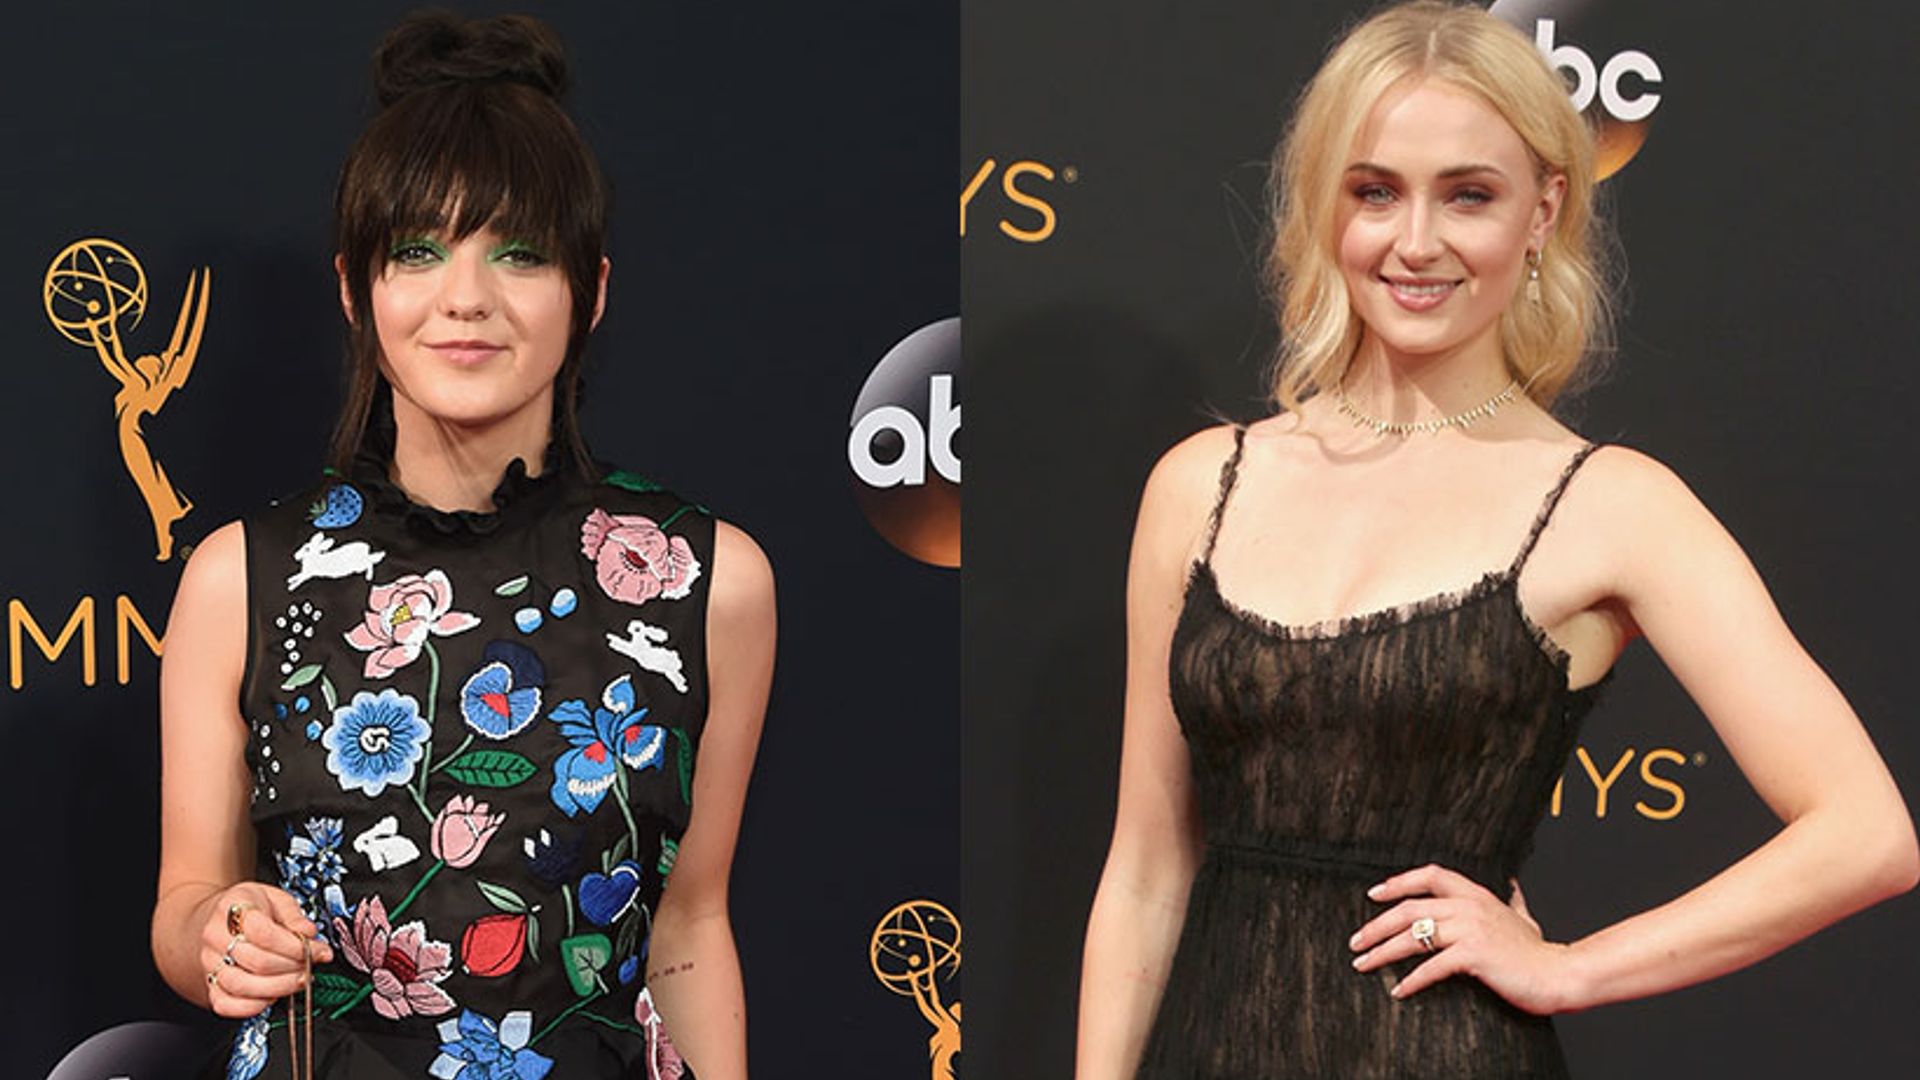 Game of Thrones stars Sophie Turner and Maisie Williams got matching tattoos